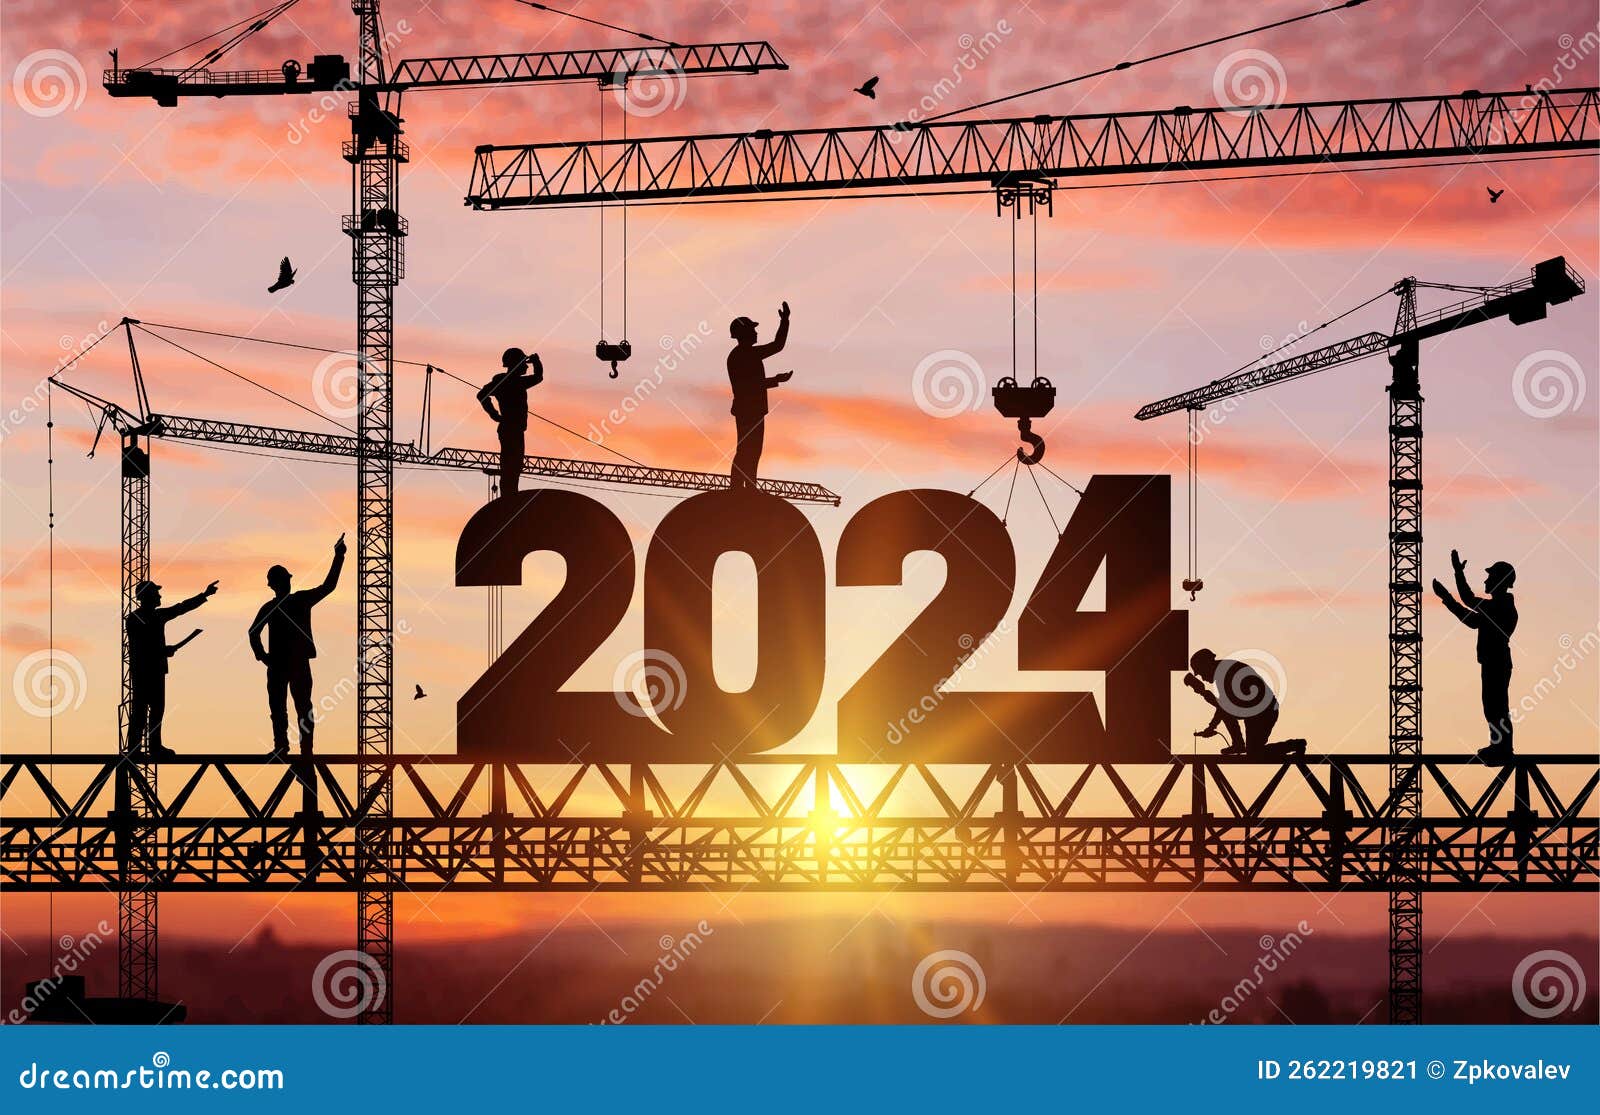 silhouette staff works as a to prepare to welcome the new year 2024. construction team sets numbers for new year 2024. large